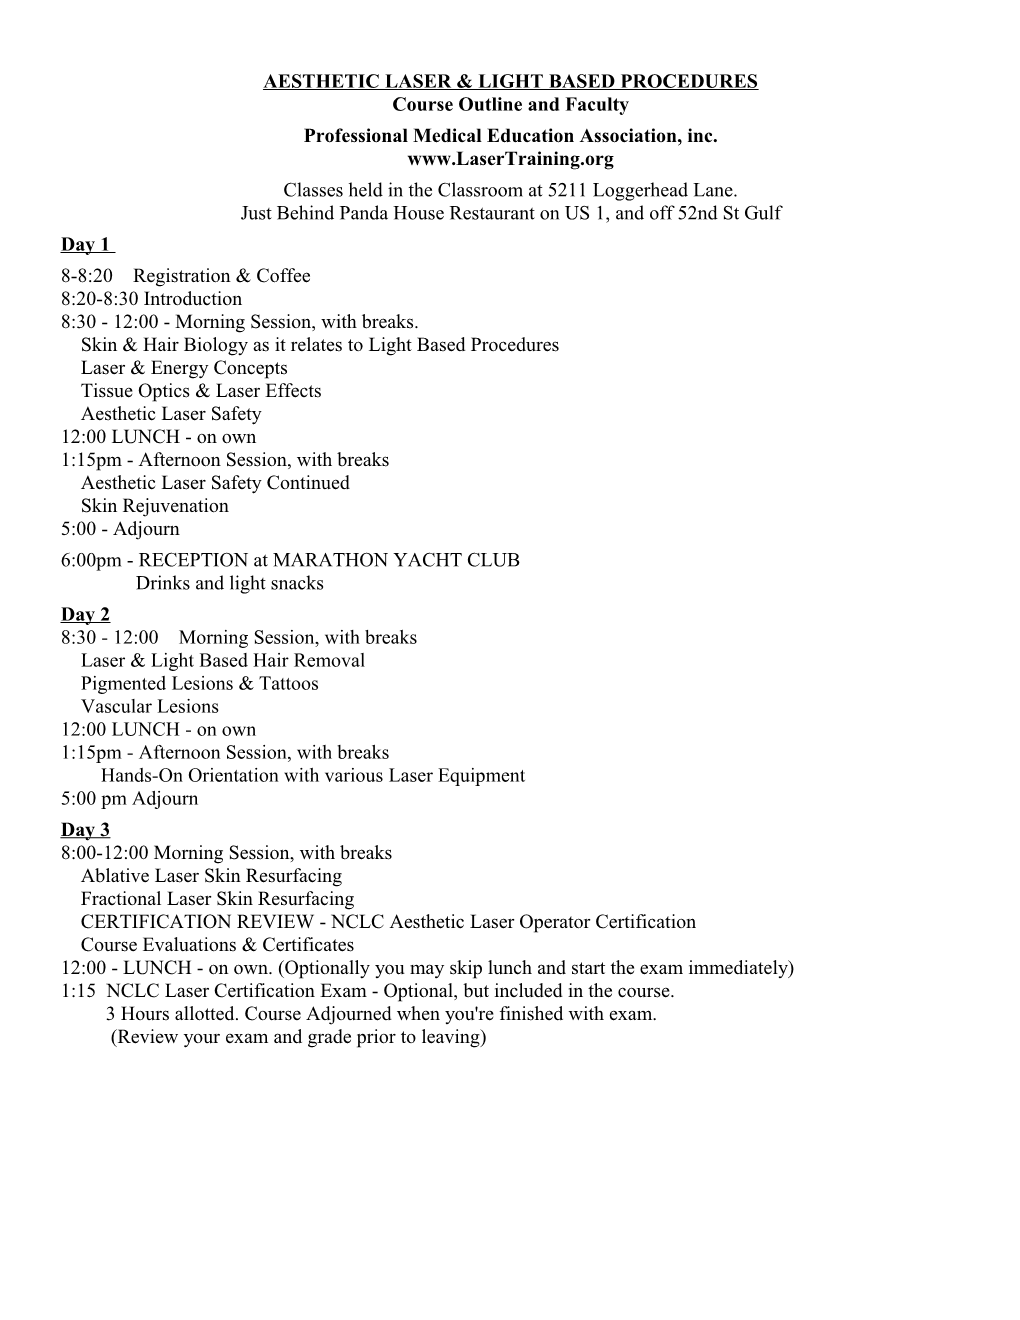 AESTHETIC LASER & LIGHT BASED PROCEDURES Course Outline and Faculty